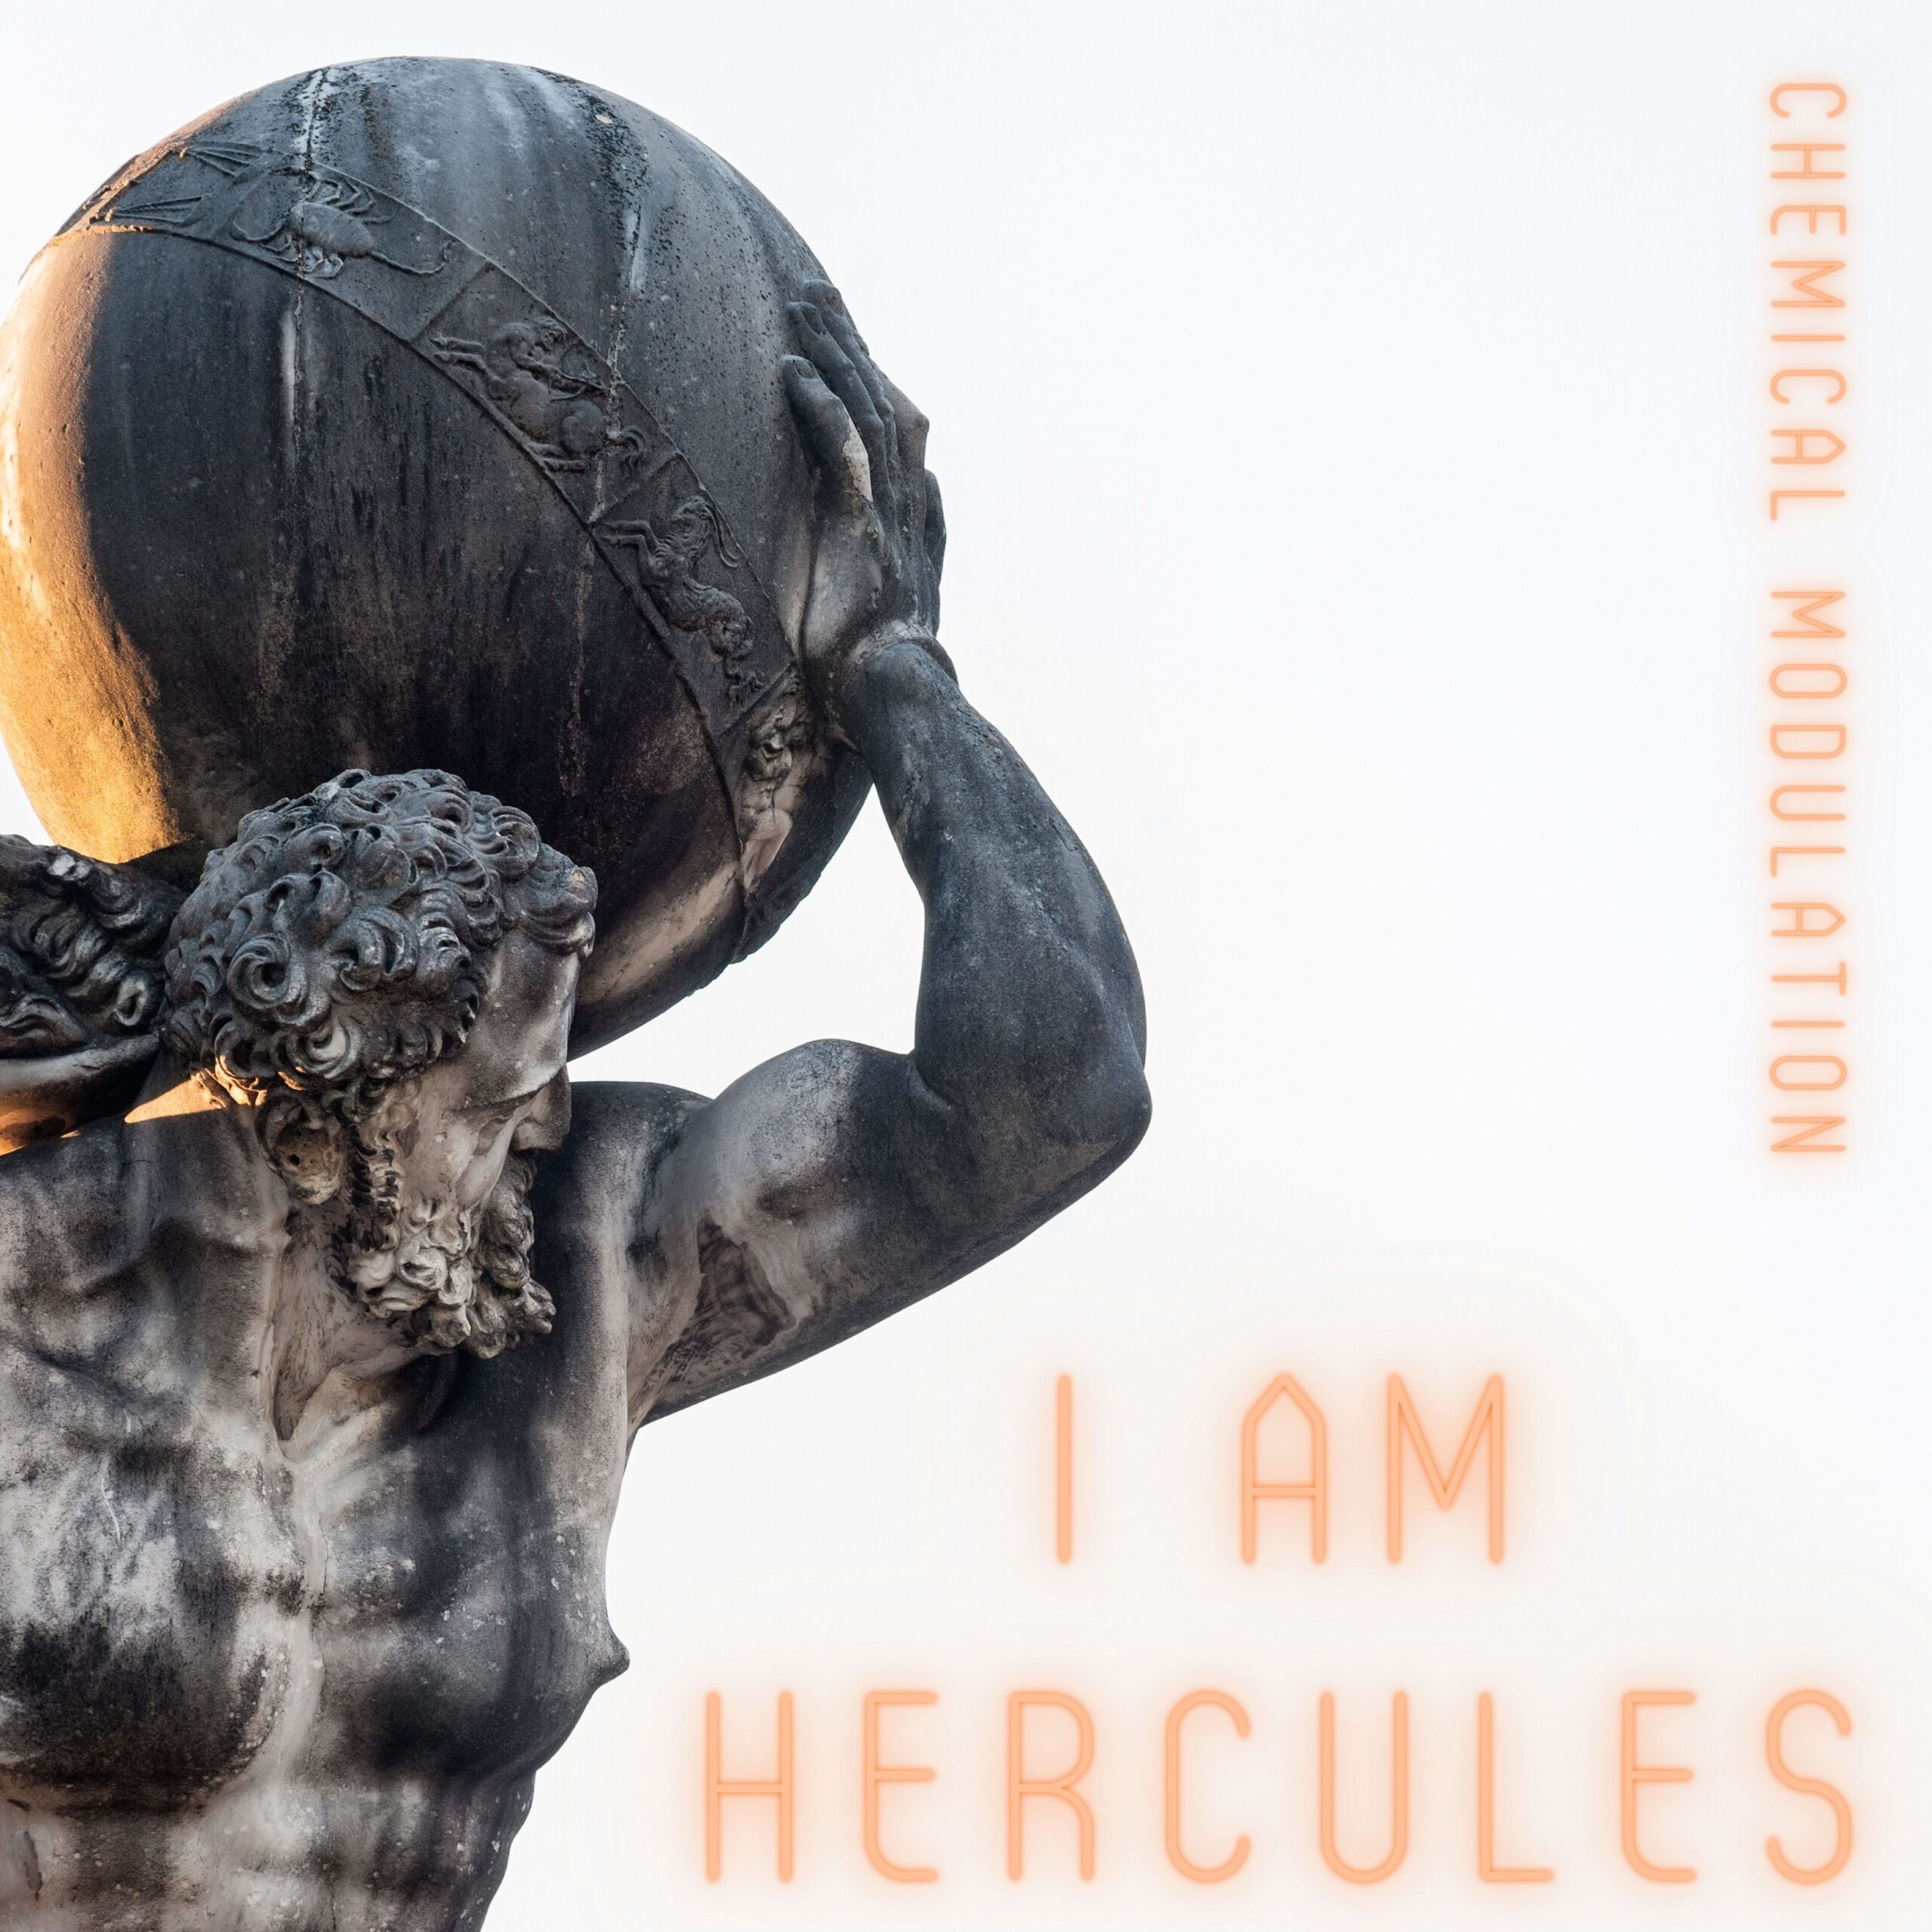 I Am Hercuels is out